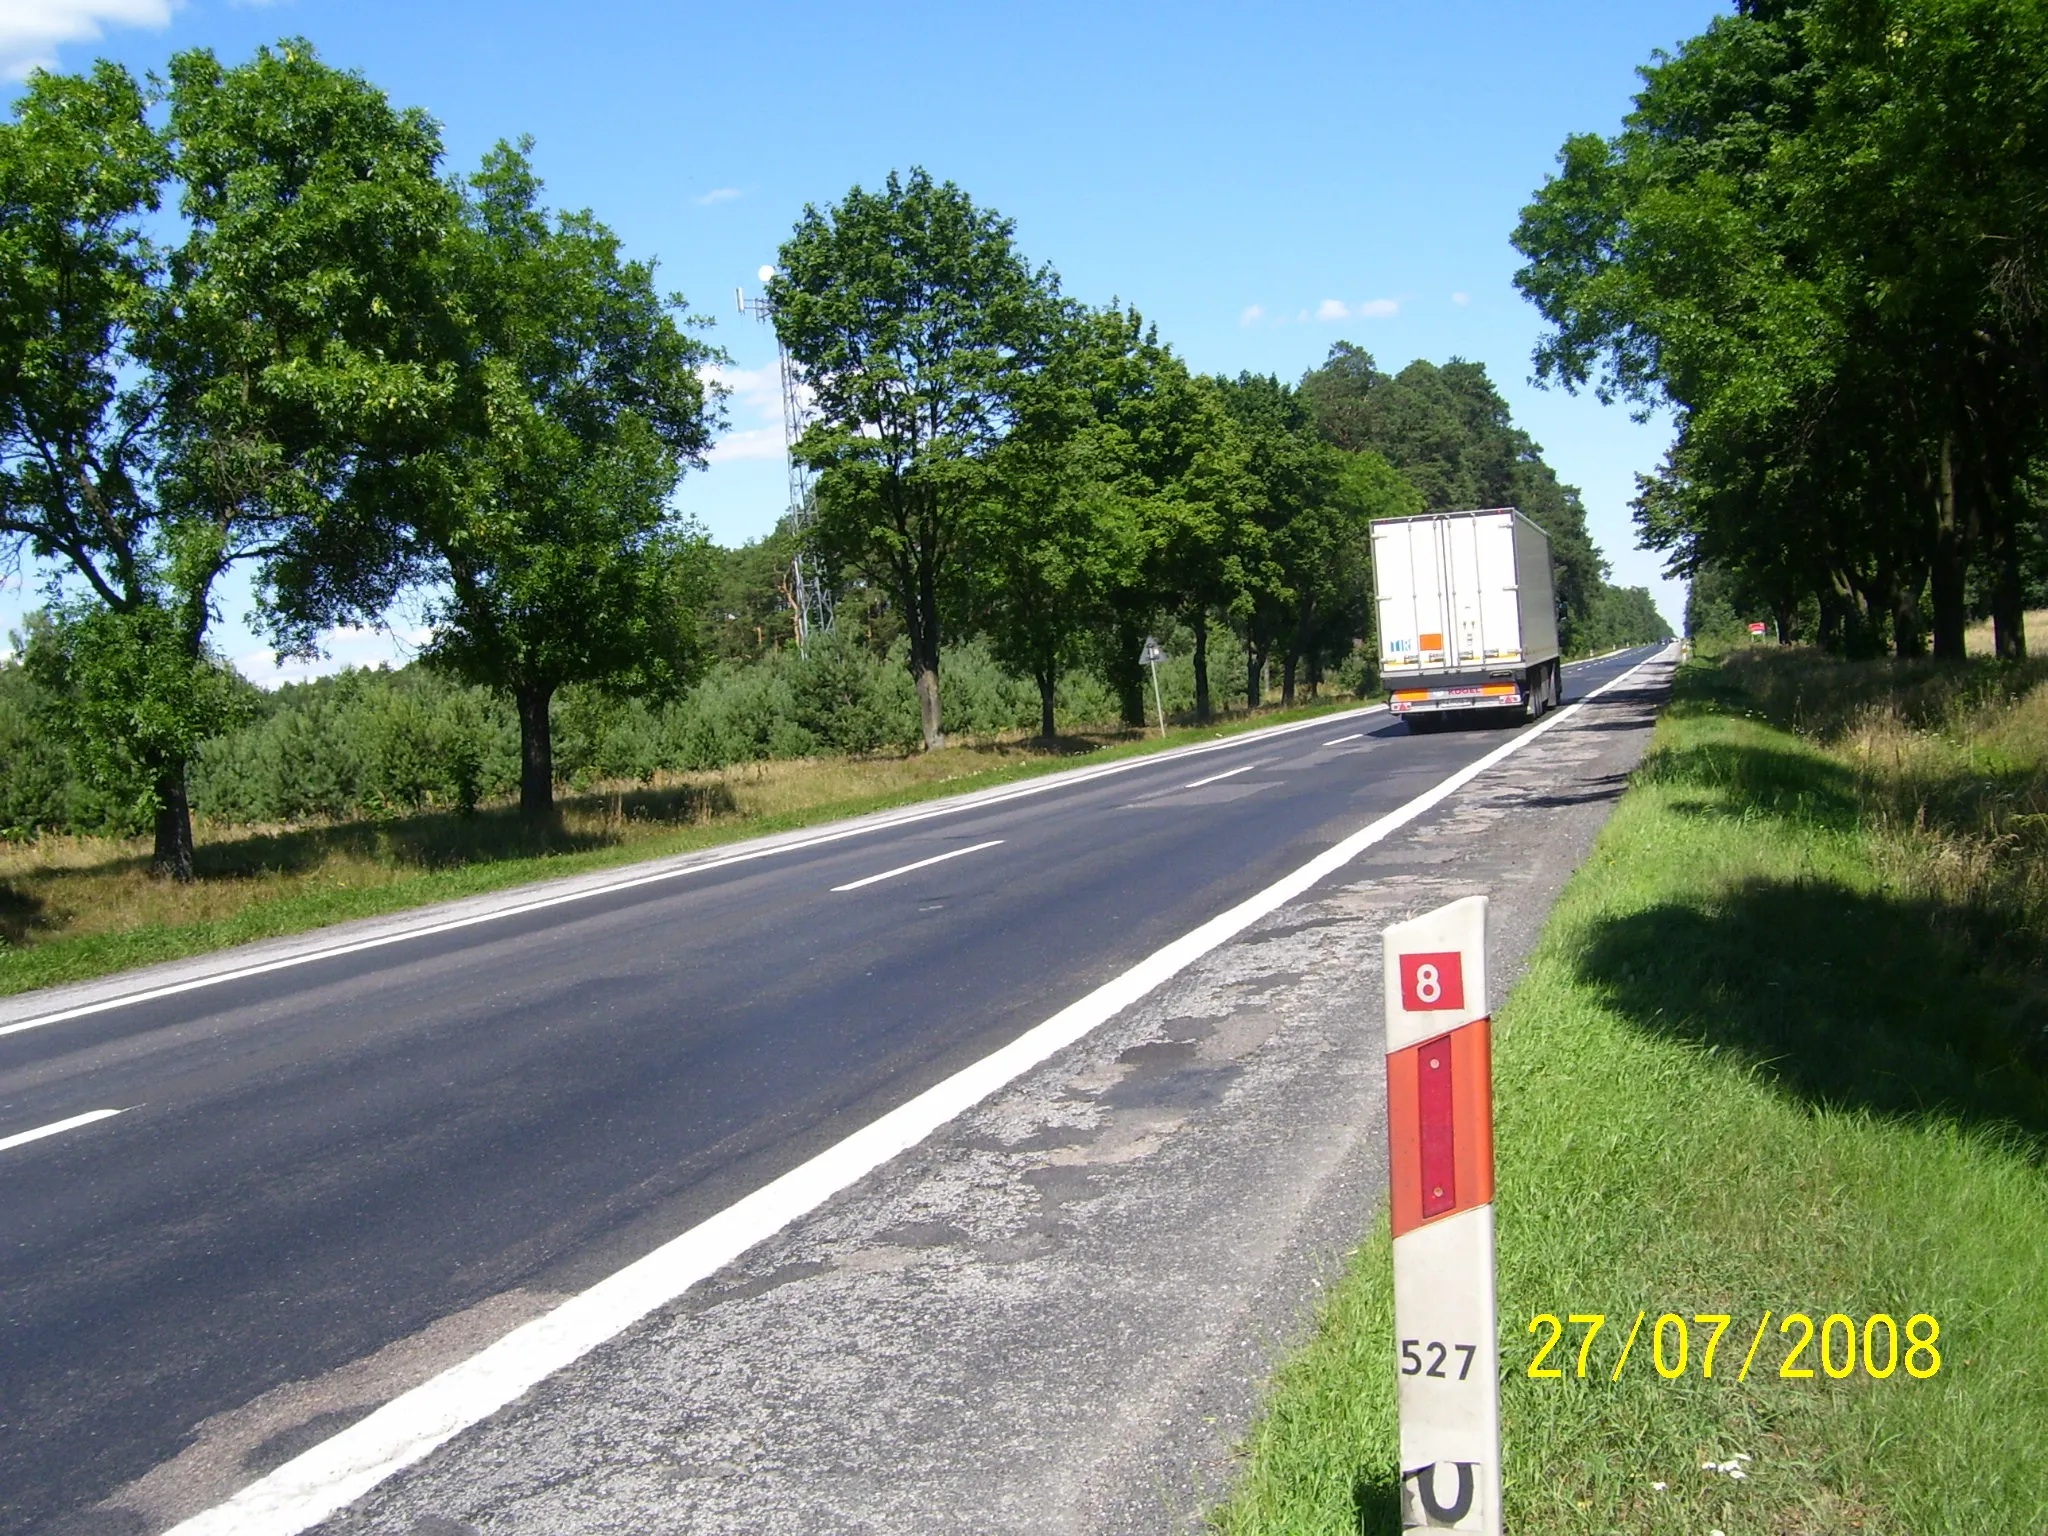 Photo showing: National road 8 in Budykierz